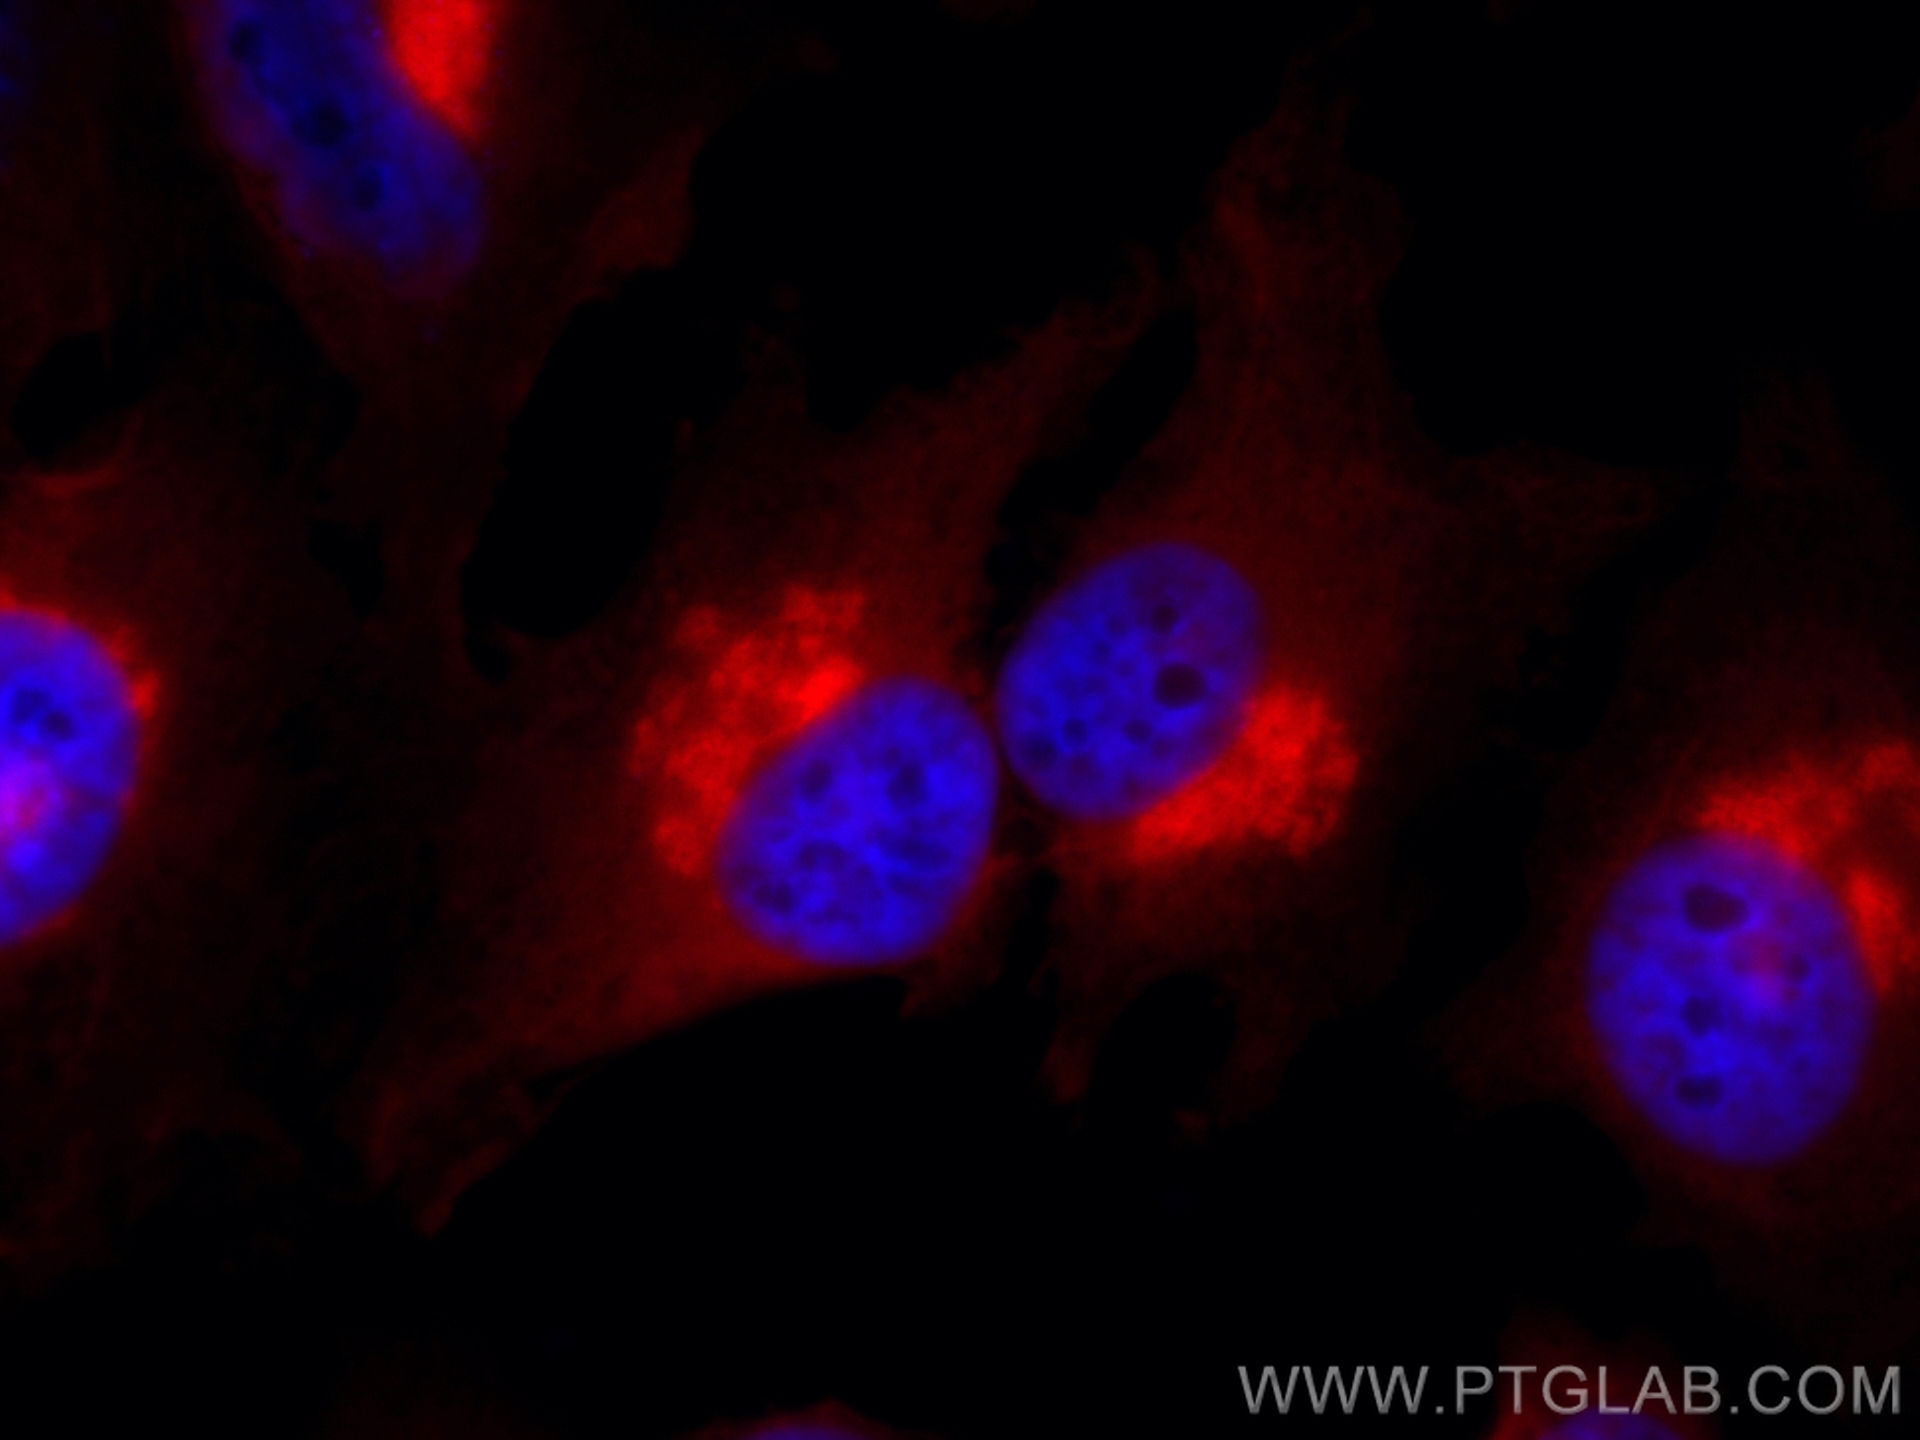 Immunofluorescence of HeLa: PFA-fixed HeLa cells were stained with anti-GORASP2 antibody (10598-1-AP) labeled with FlexAble HRP Antibody Labeling Kit for Rabbit IgG (KFA005) and Tyramide-594 (red). Cell nuclei are in blue. 